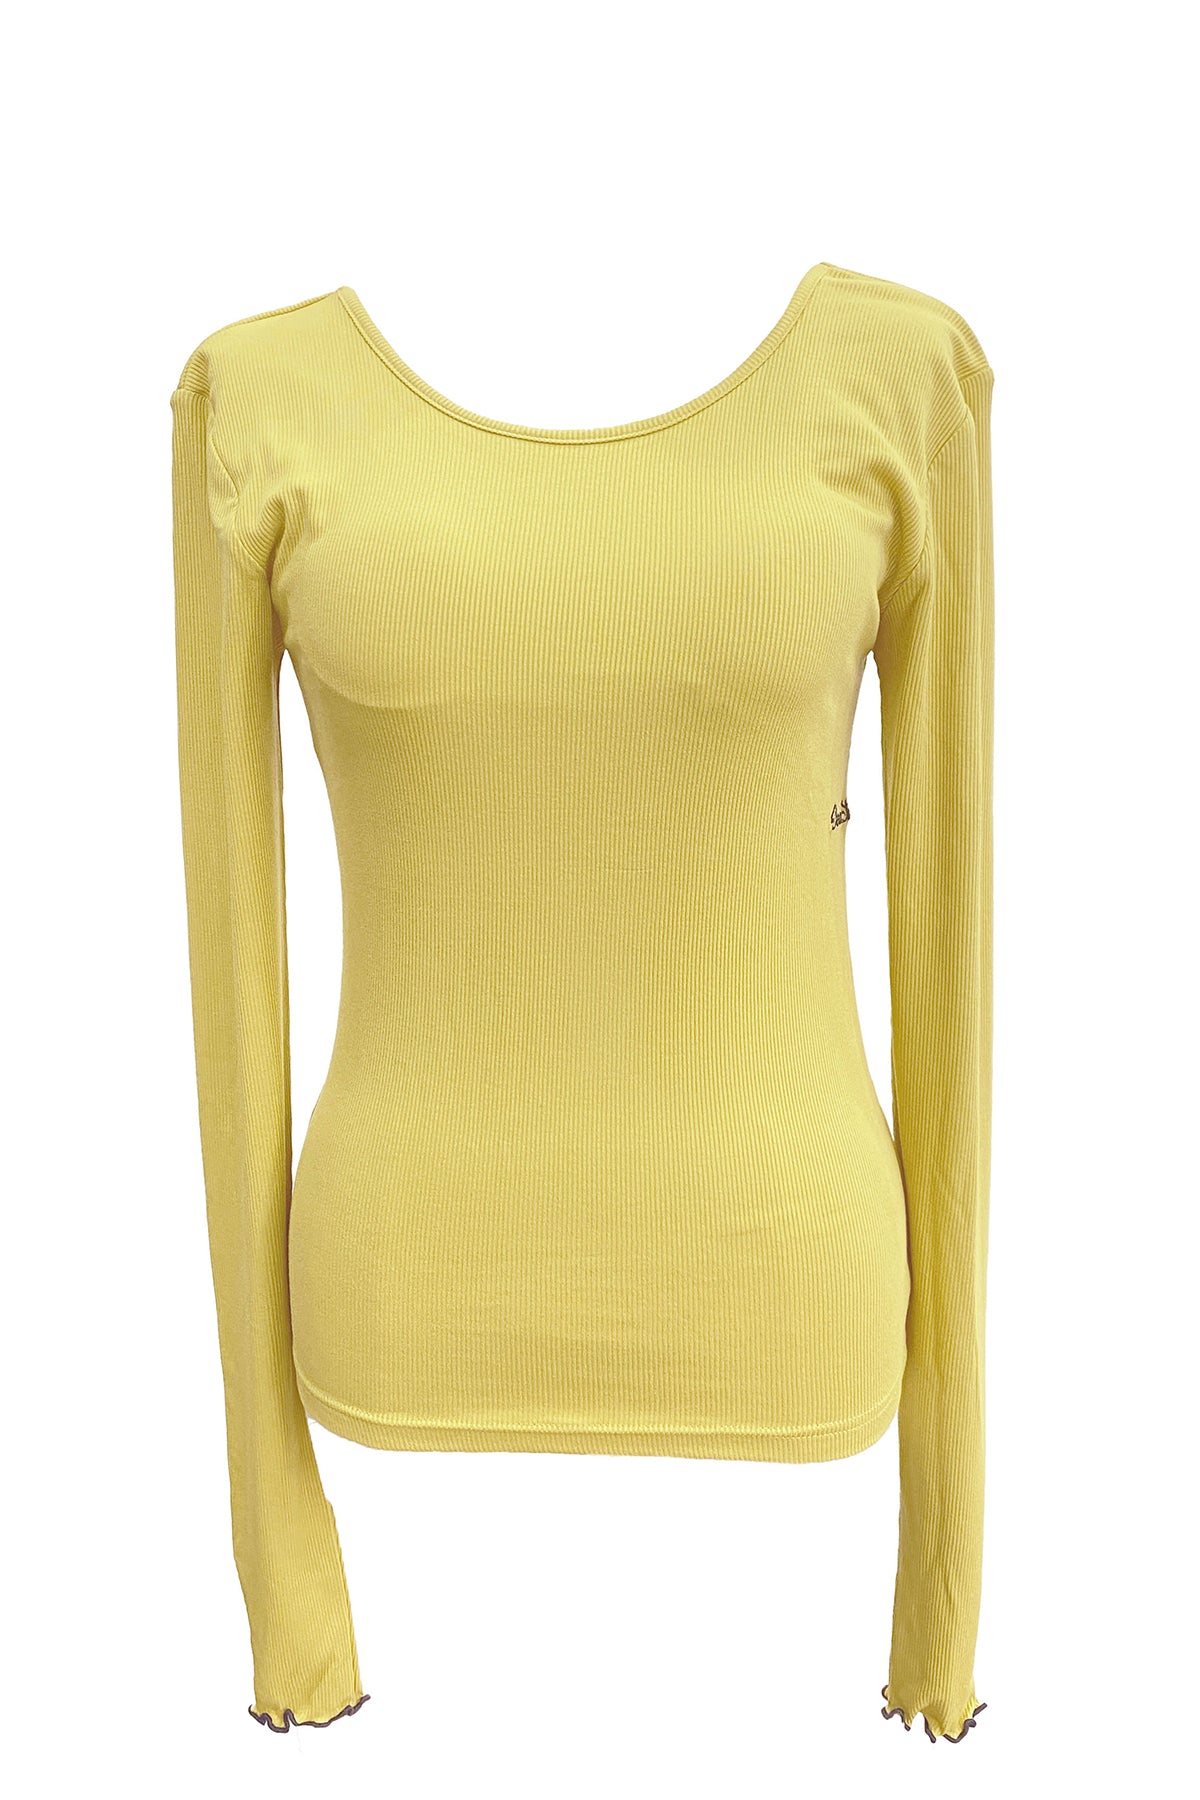 SISTERS Bra Cup Long Sleeve Tops / Yellow